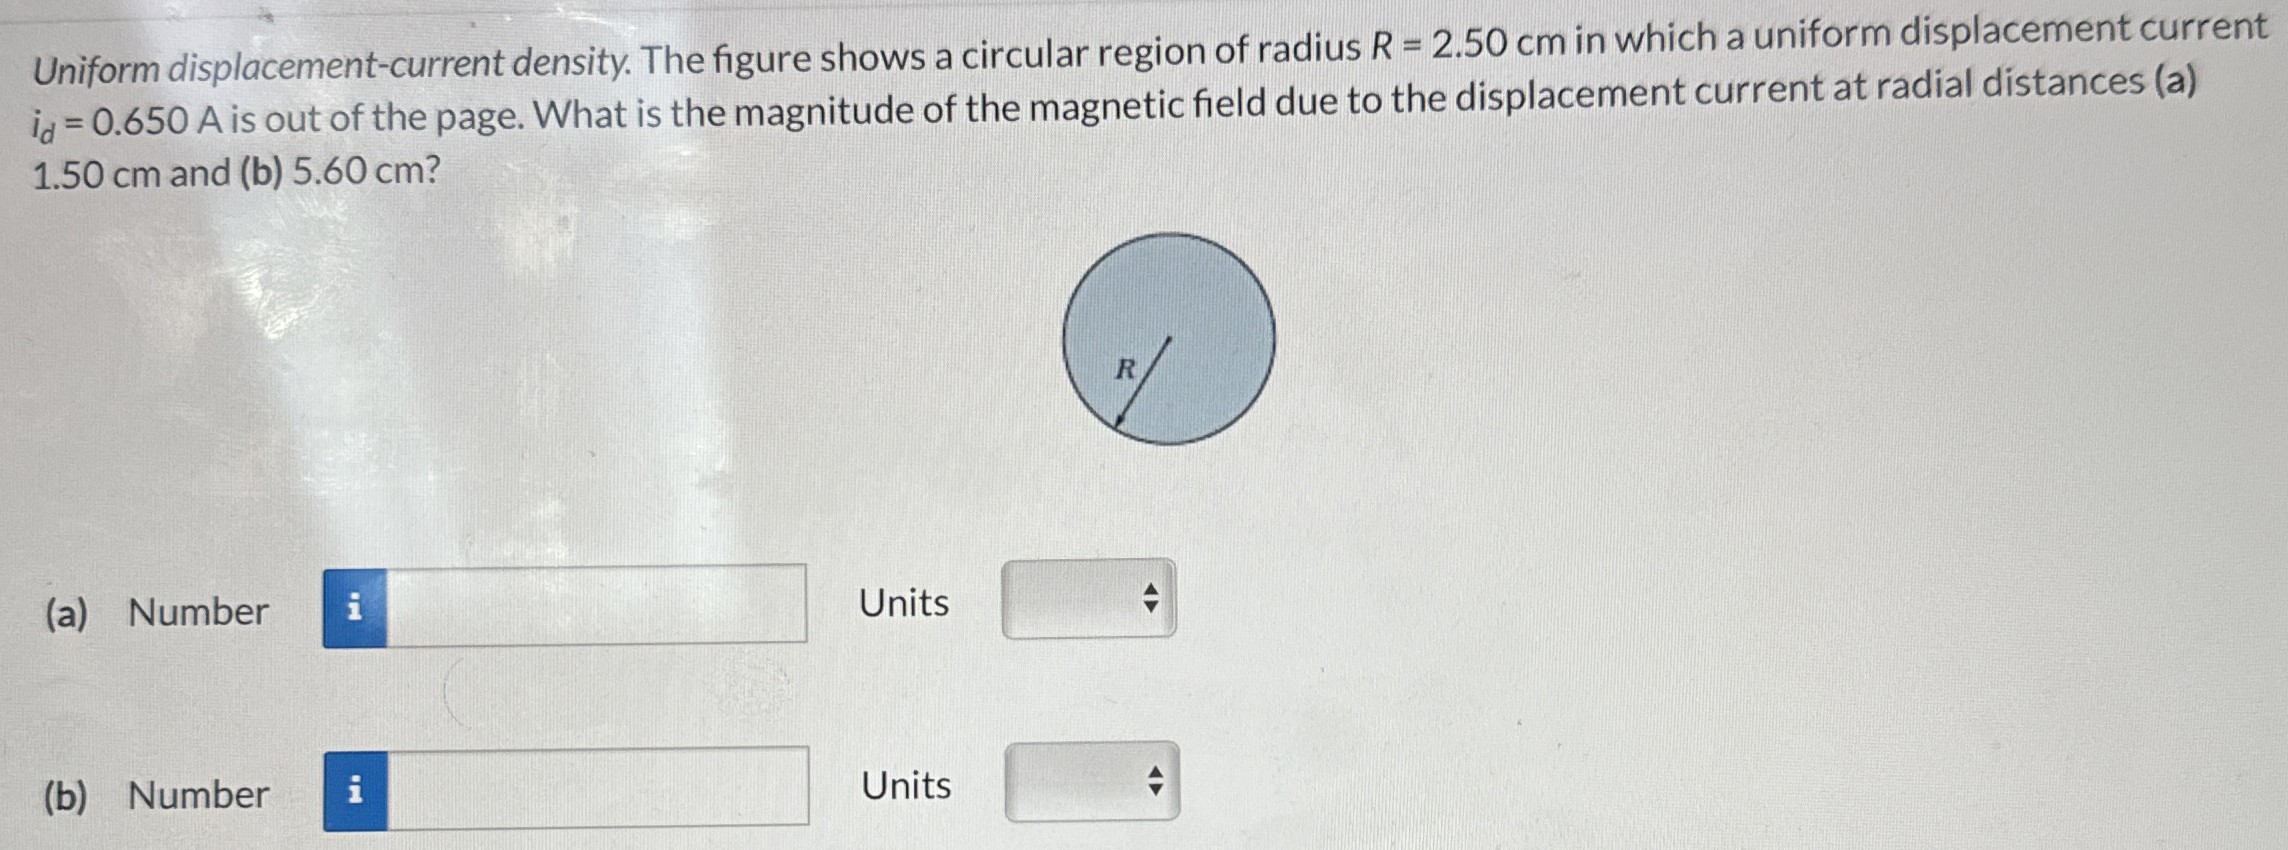 Uniform displacement-current density. The figure shows a circular region of radius R = 2.50 cm in which a uniform displacement current id = 0.650 A is out of the page. What is the magnitude of the magnetic field due to the displacement current at radial distances (a) 1.50 cm and (b) 5.60 cm? (a) Number Units (b) Number Units